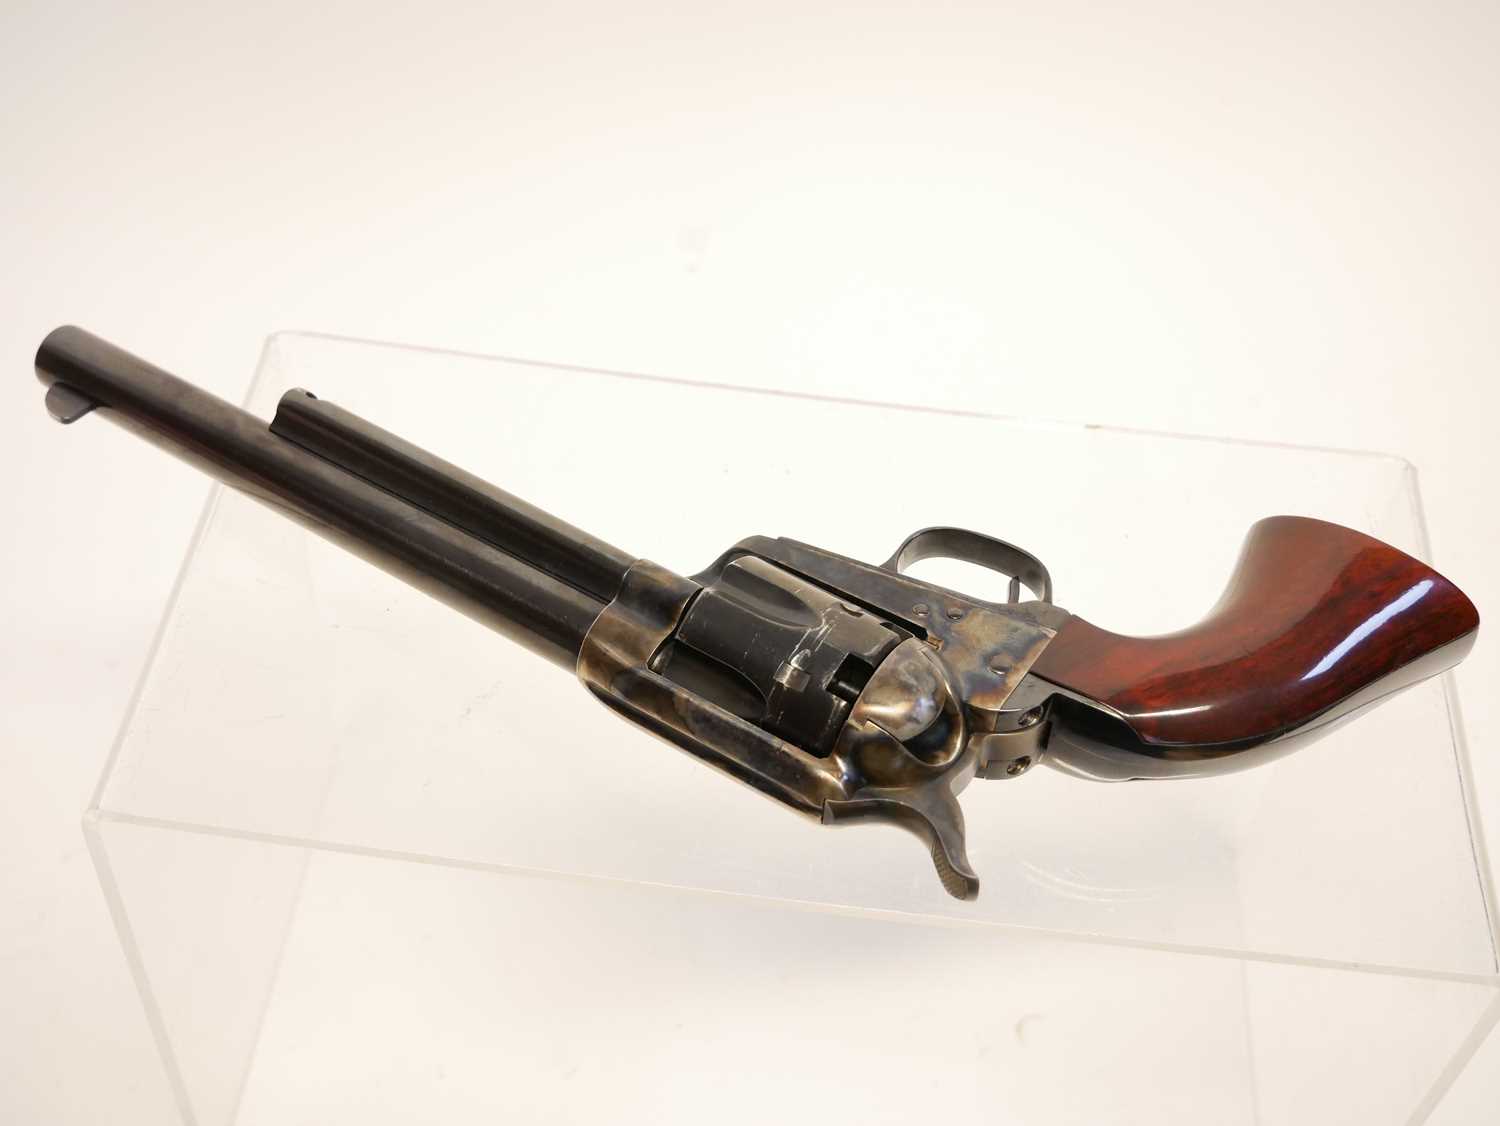 Uberti .44 percussion muzzle loading cattleman revolver, serial number UG0263, 7.5inch barrel, - Image 4 of 10